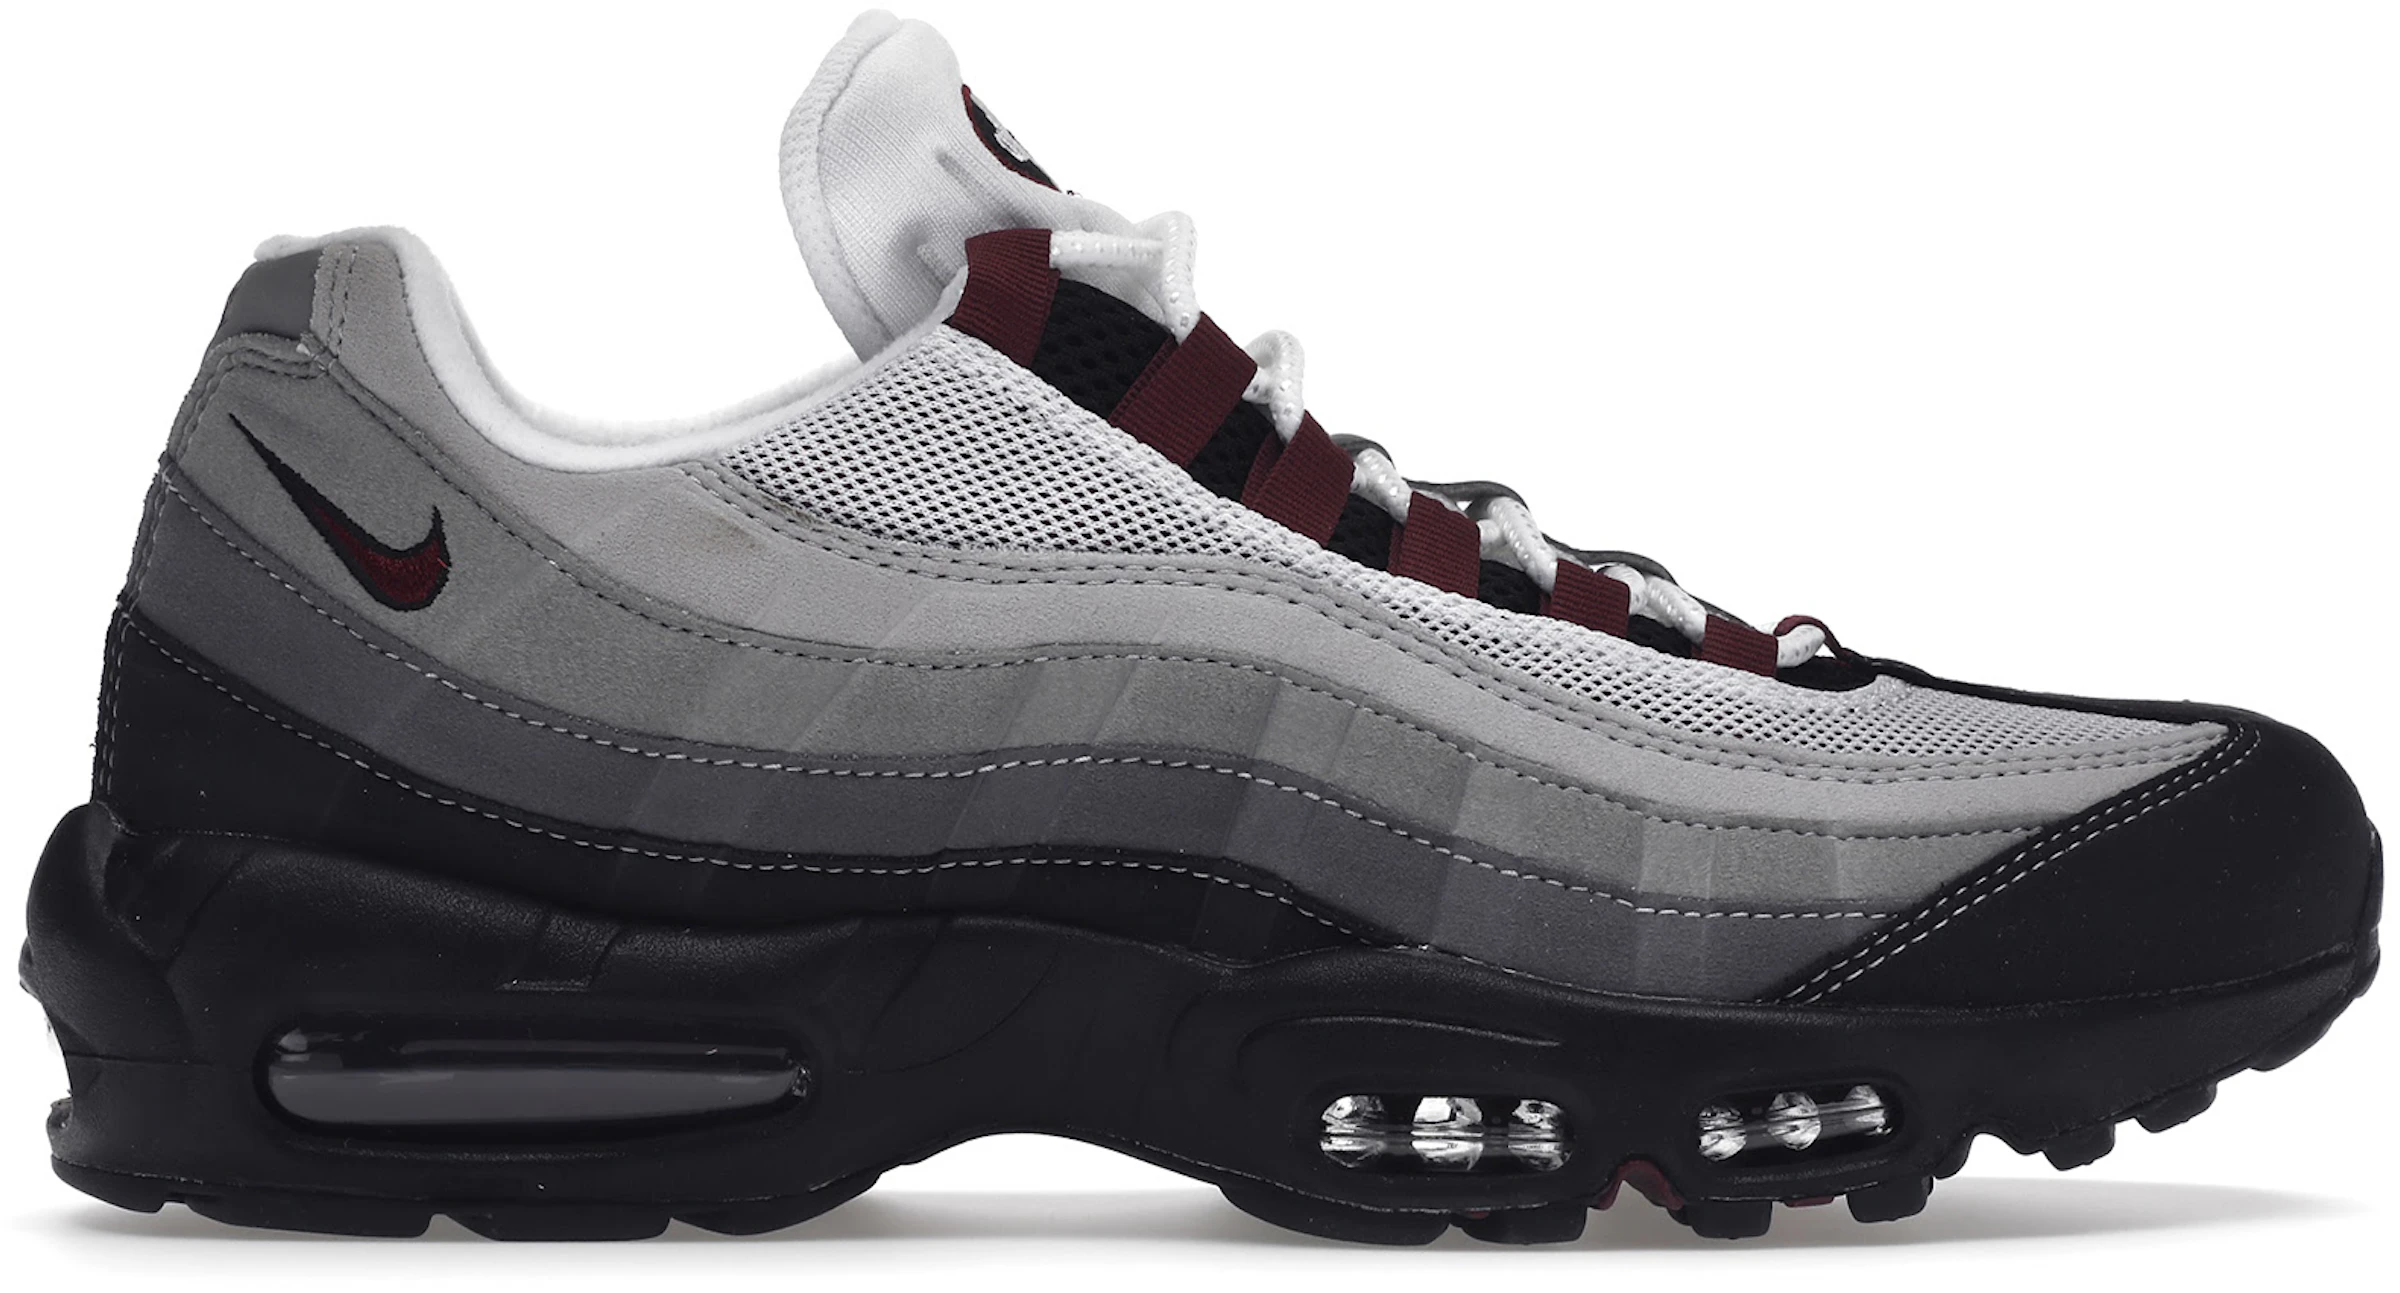 Buy Nike Air Max 95 Shoes & New - StockX